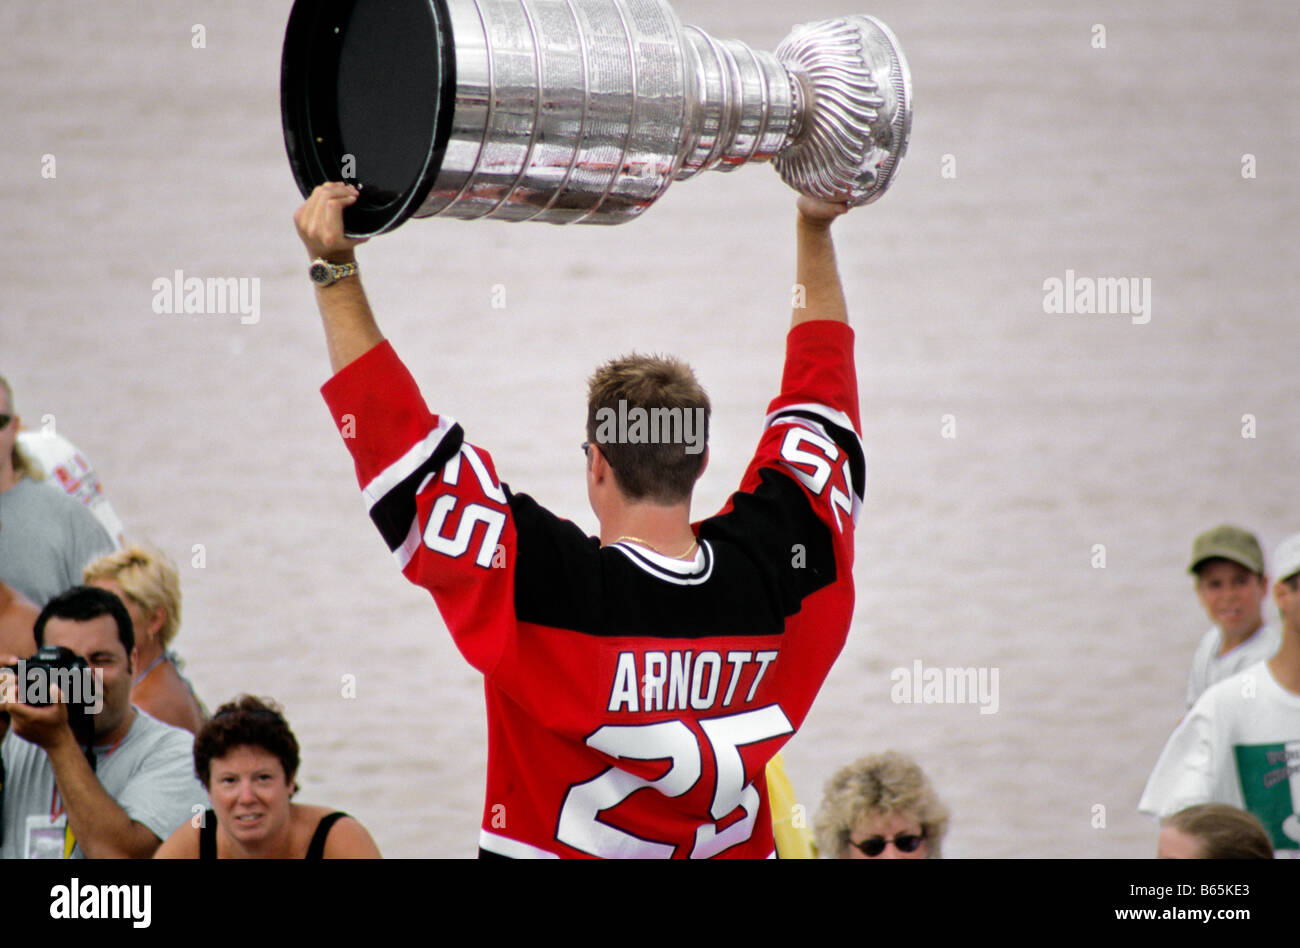 2000 stanley cup